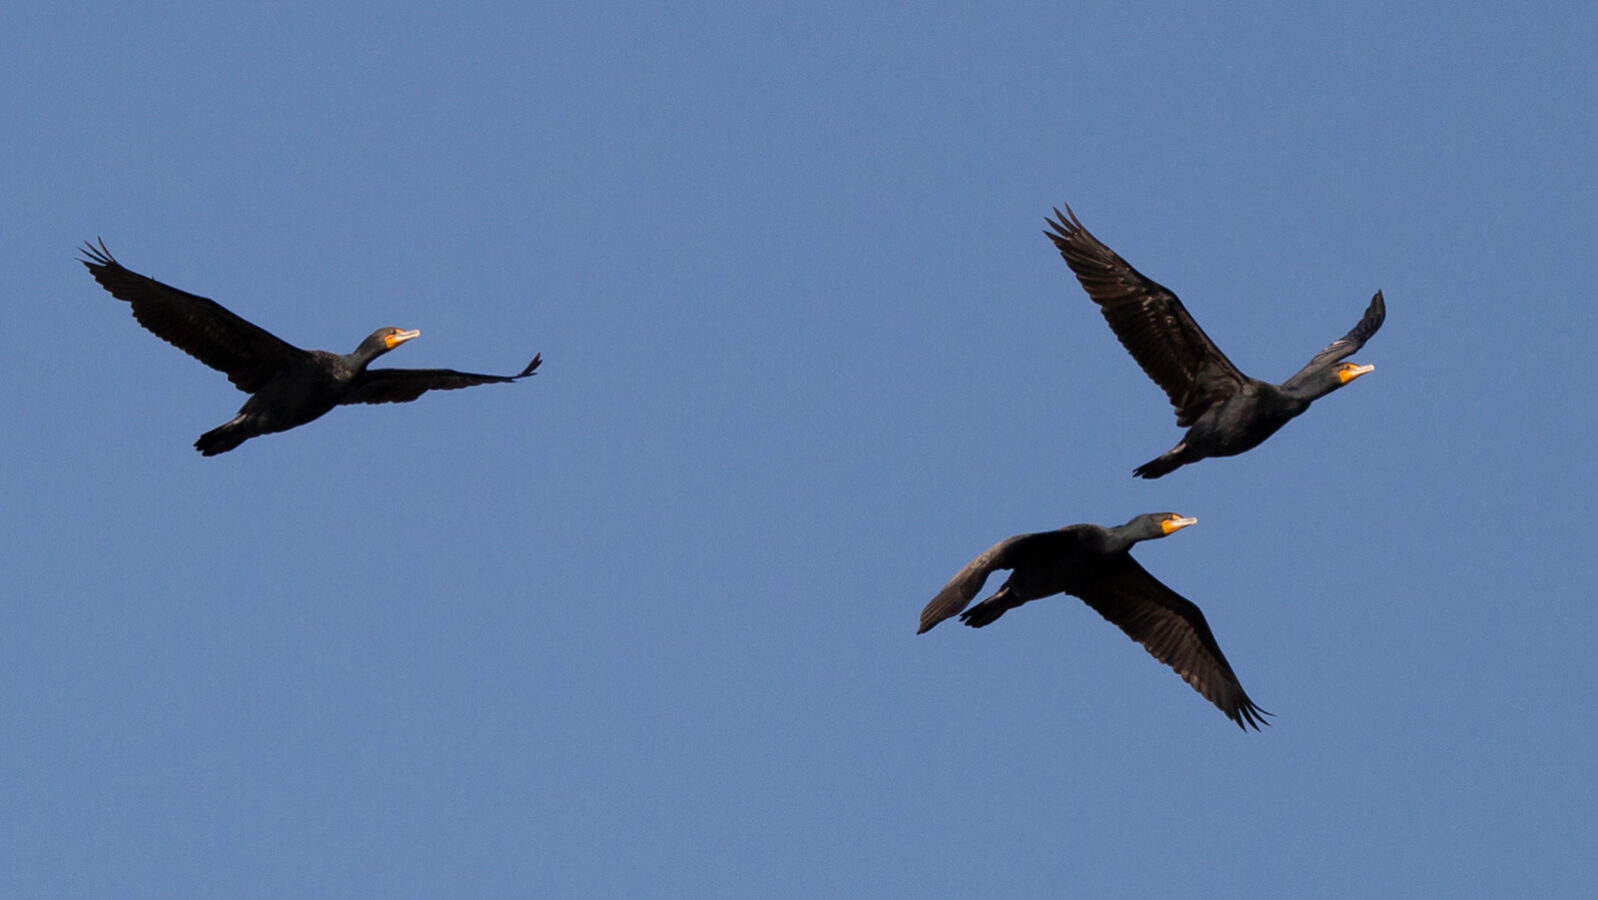 Three double-crested cormorants soaring in blue sky